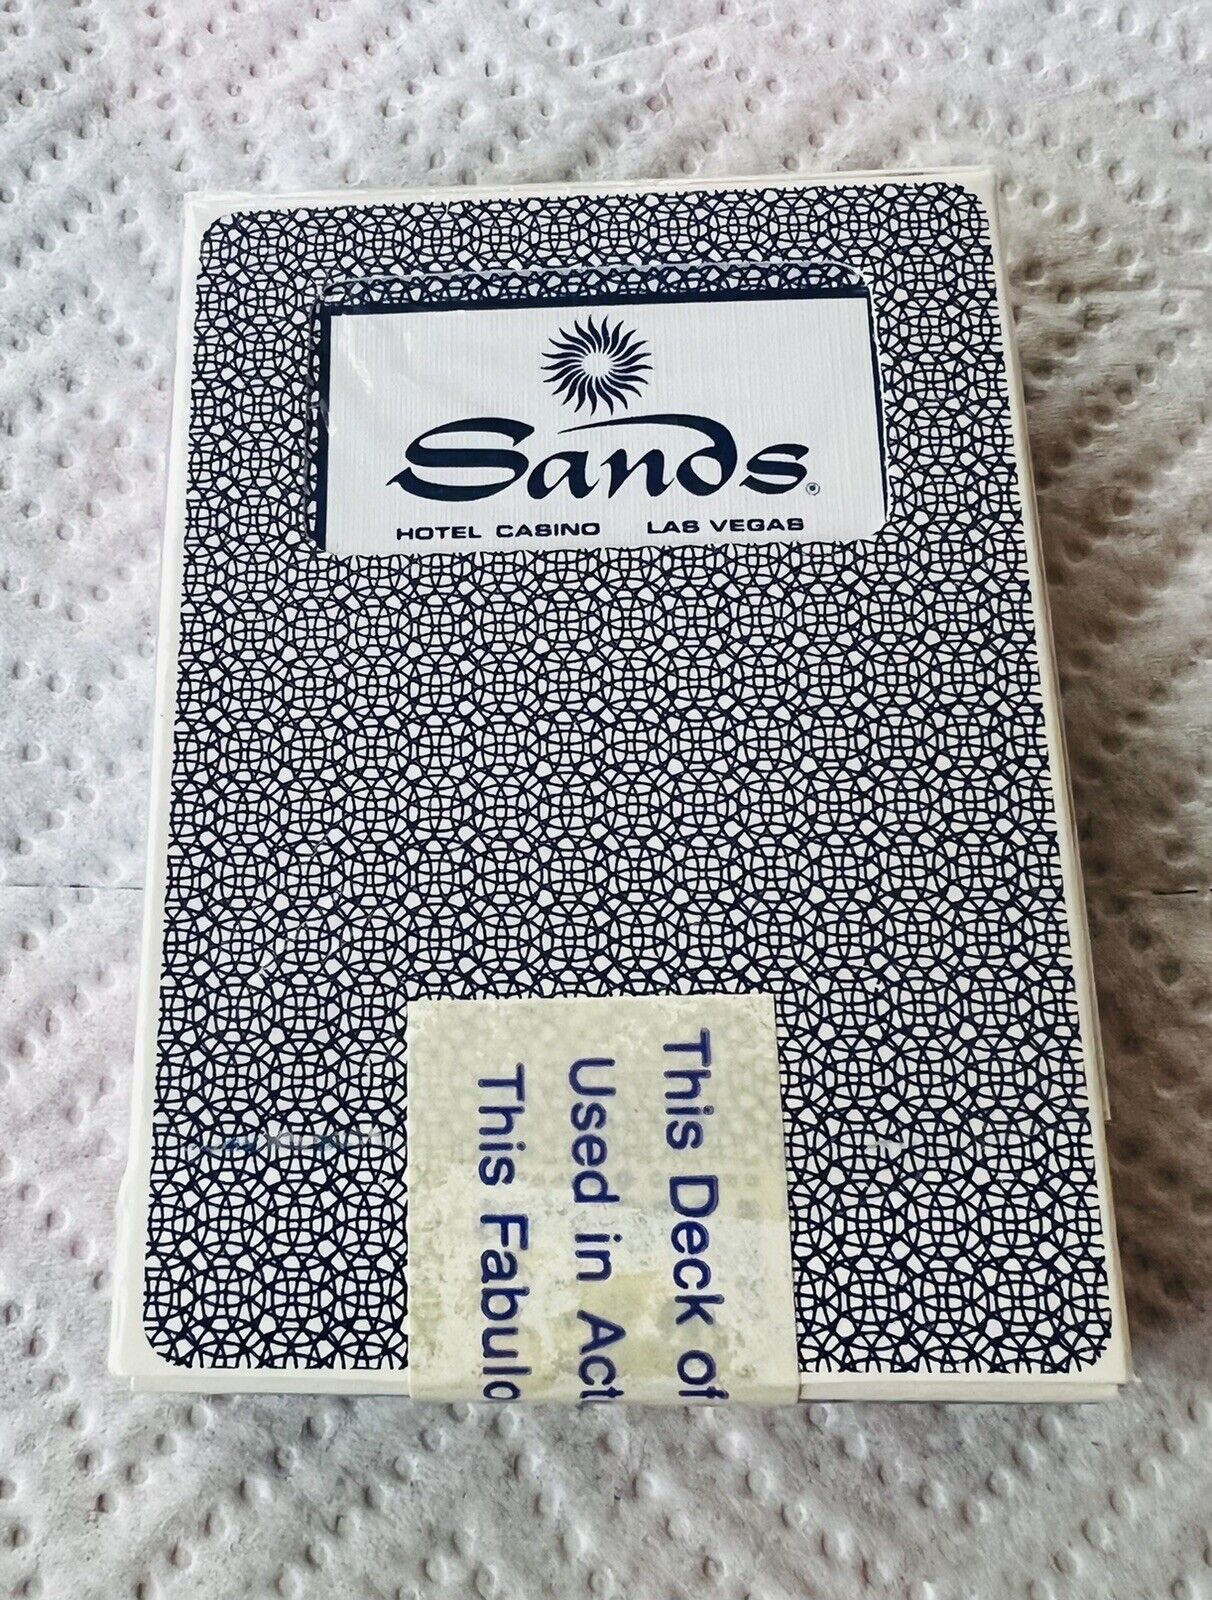 SANDS HOTEL & CASINO - USED DECK PLAYING CARDS BLUE,  LAS VEGAS, STRIP